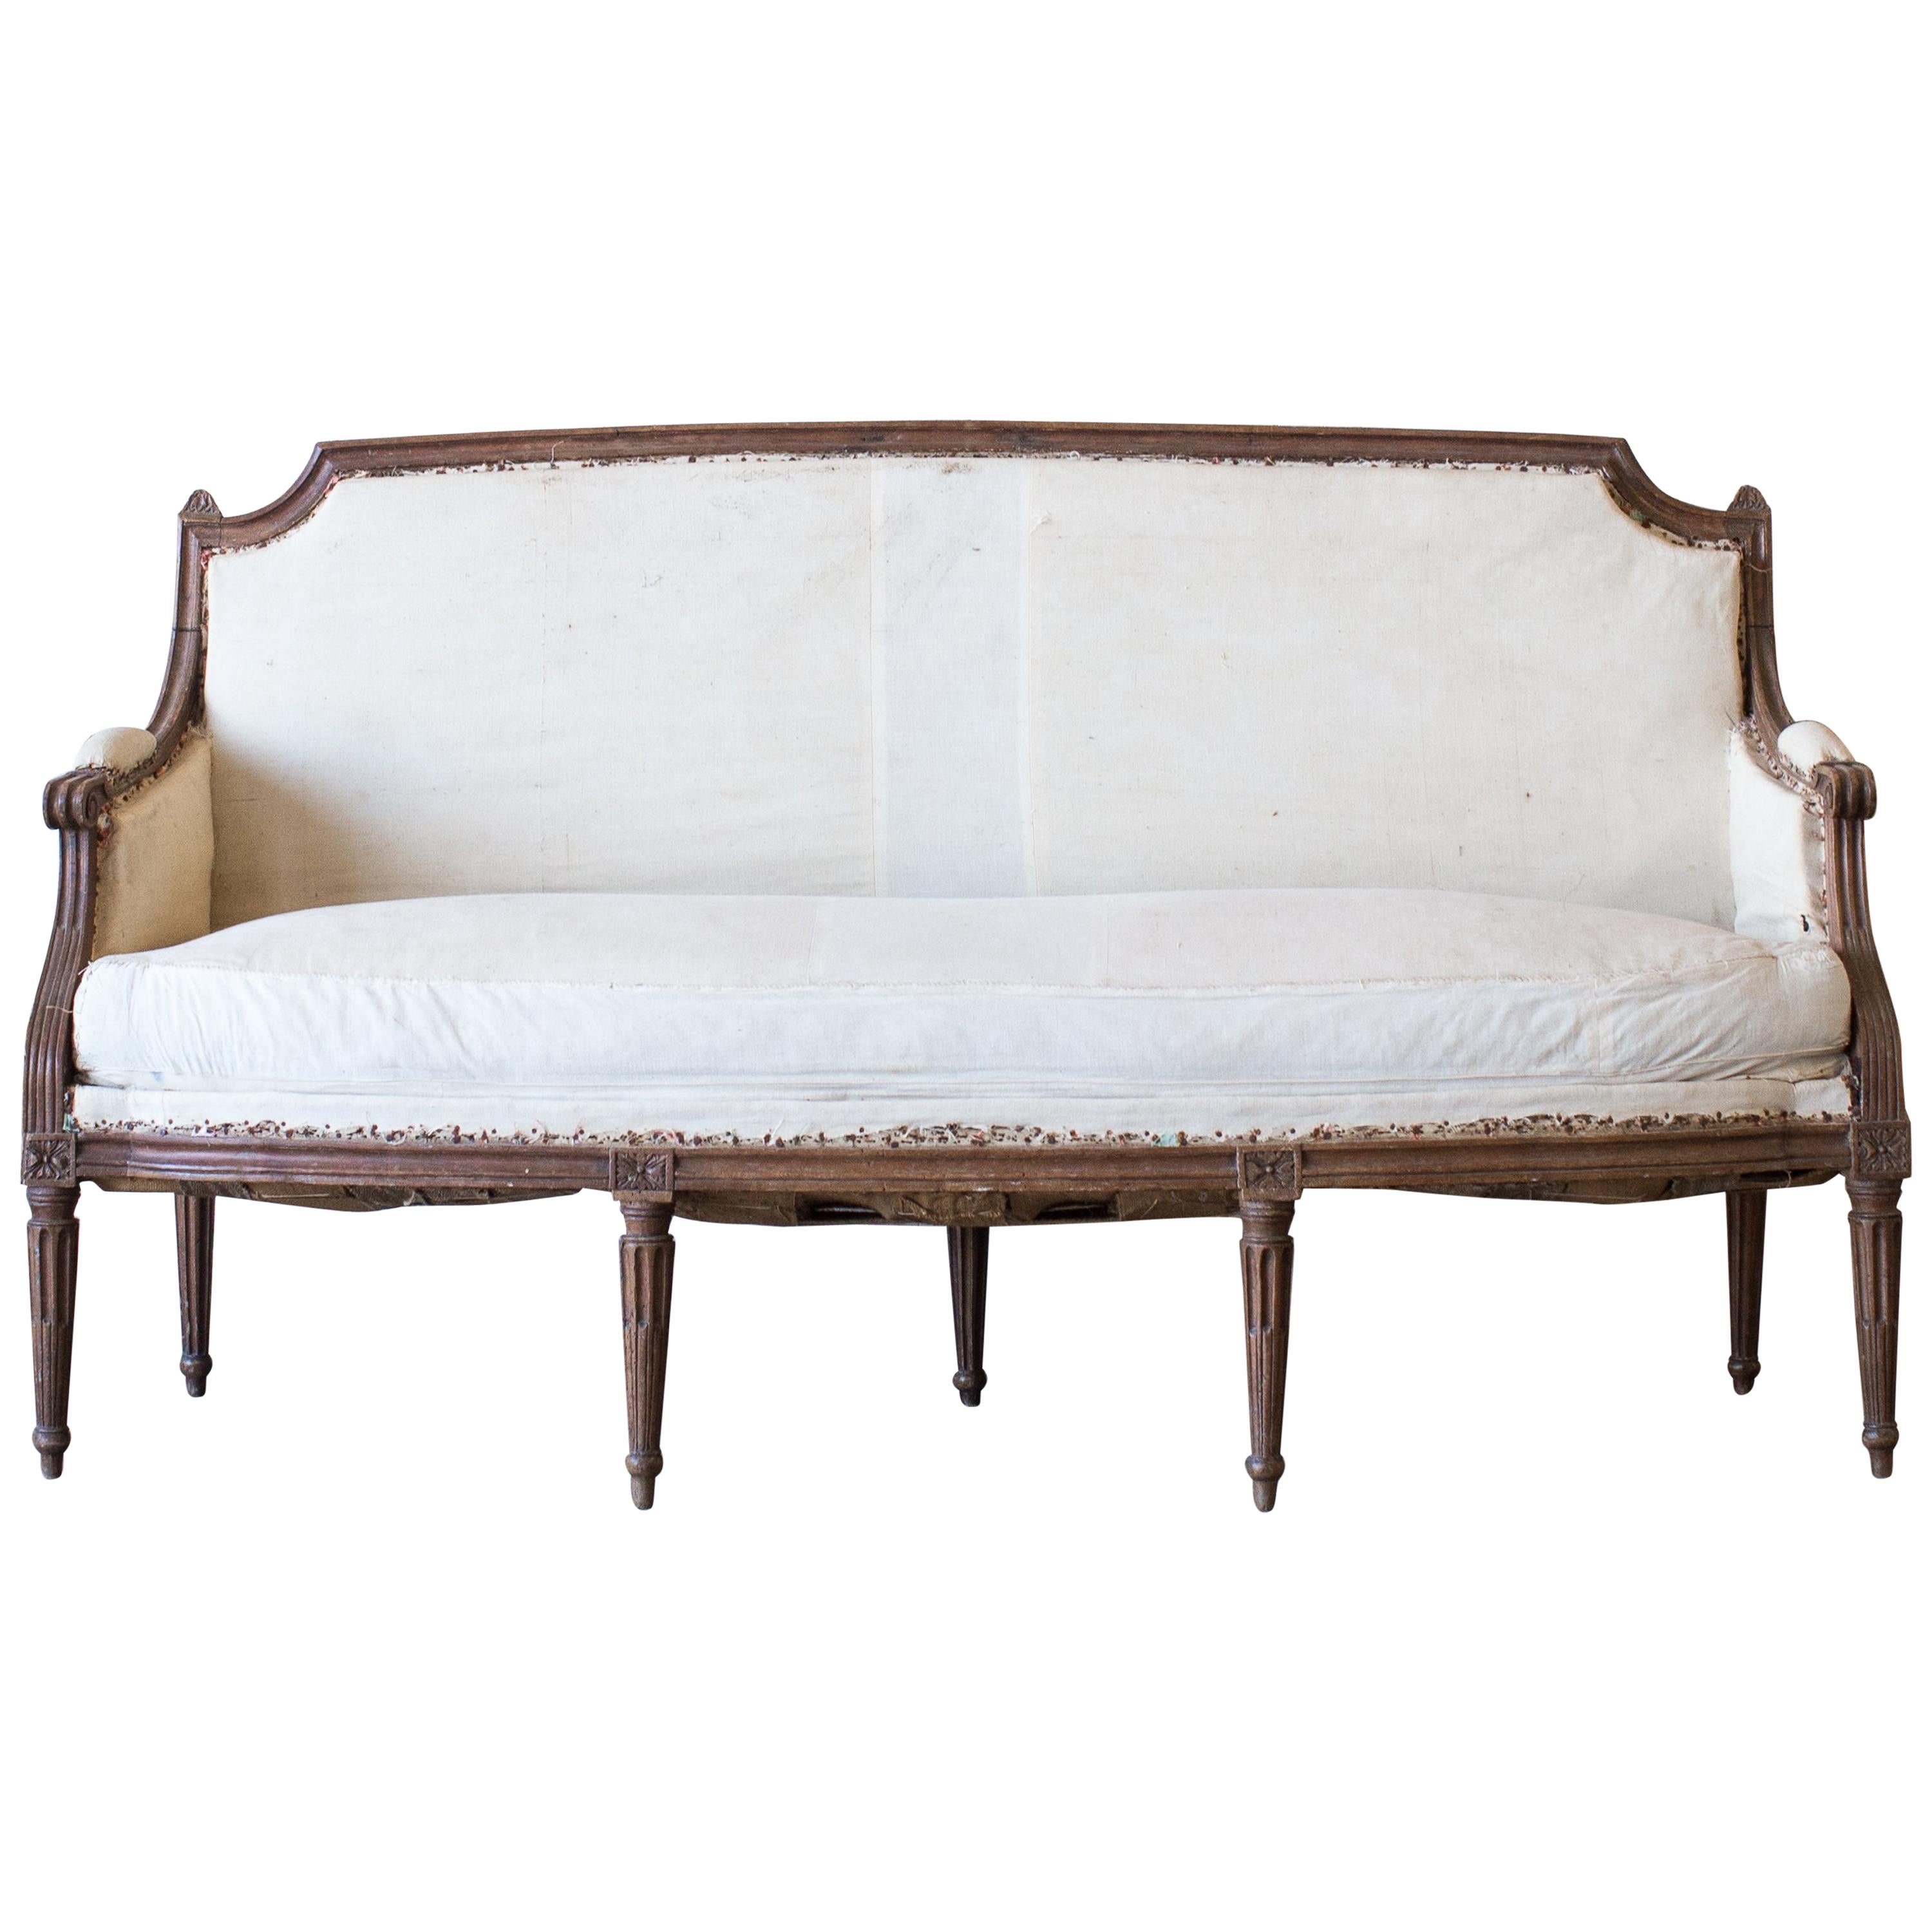 Antique French Settee, 1800